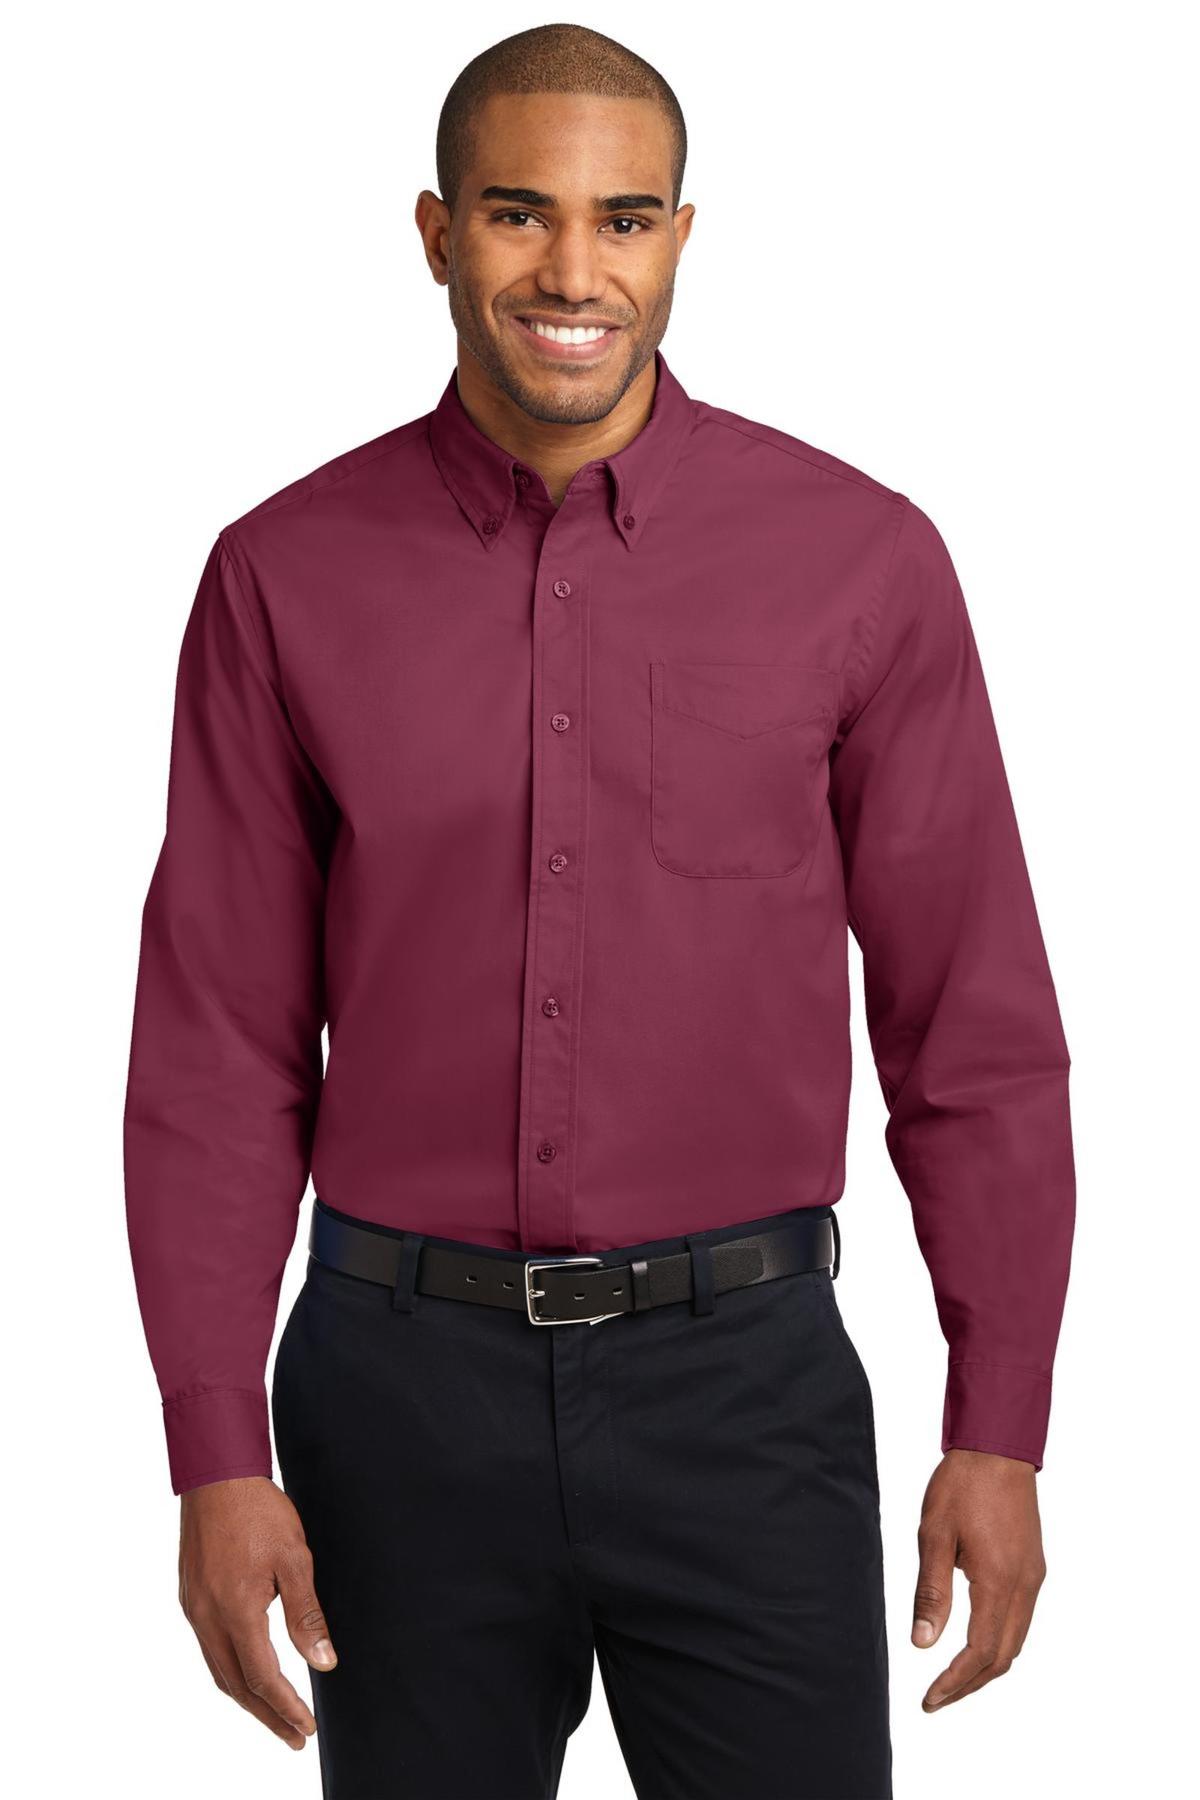  Daupanzees Men's Long Sleeve Embroidered Shirt Classic